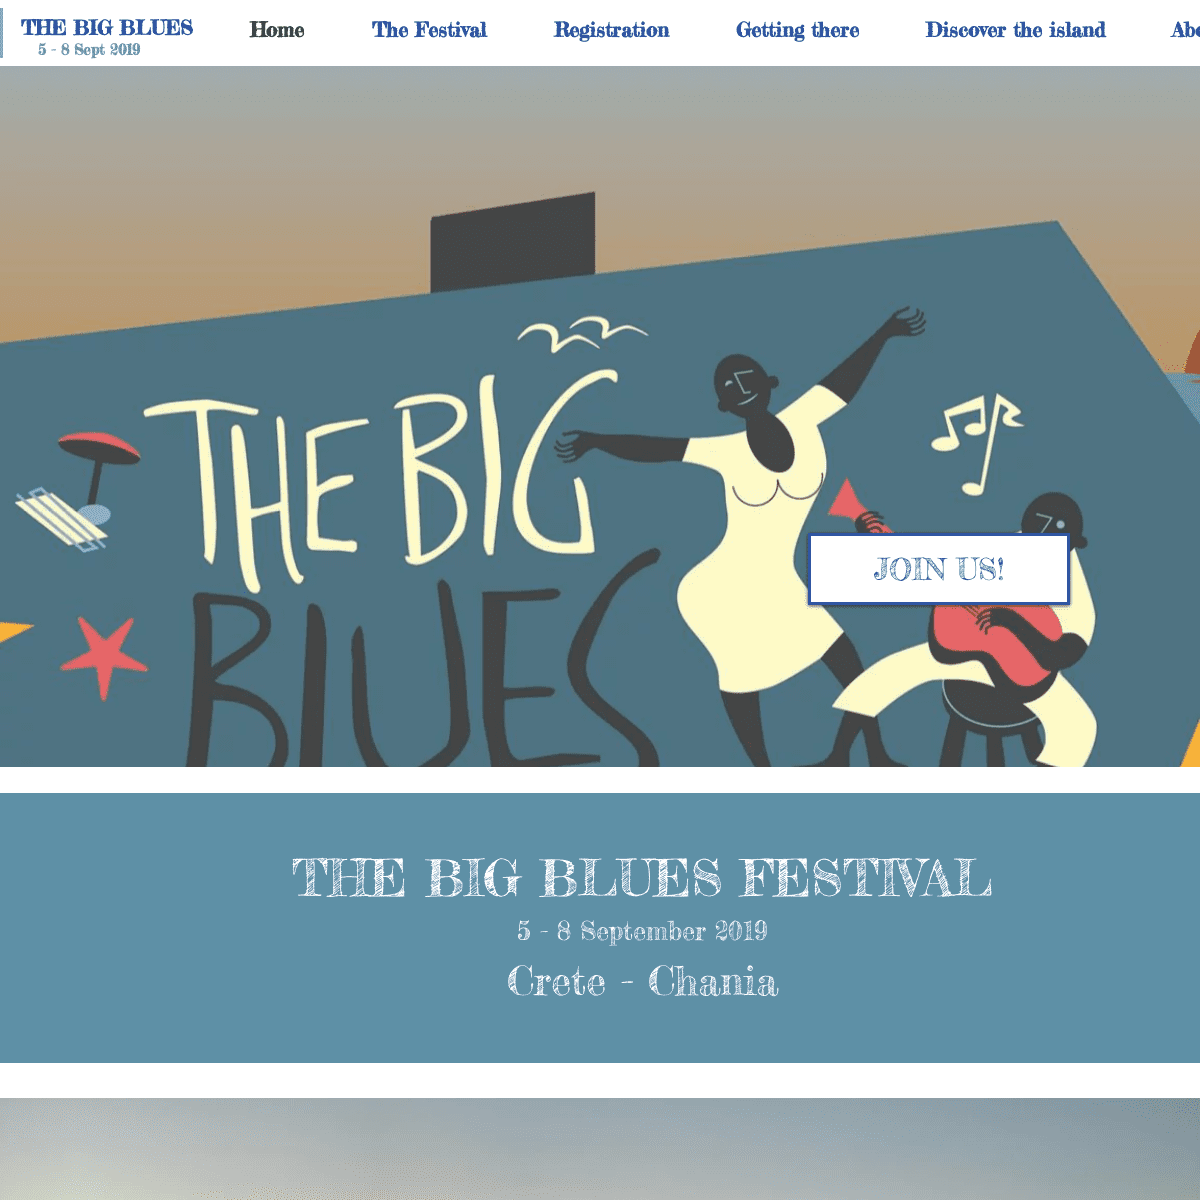 A complete backup of thebigblues.org